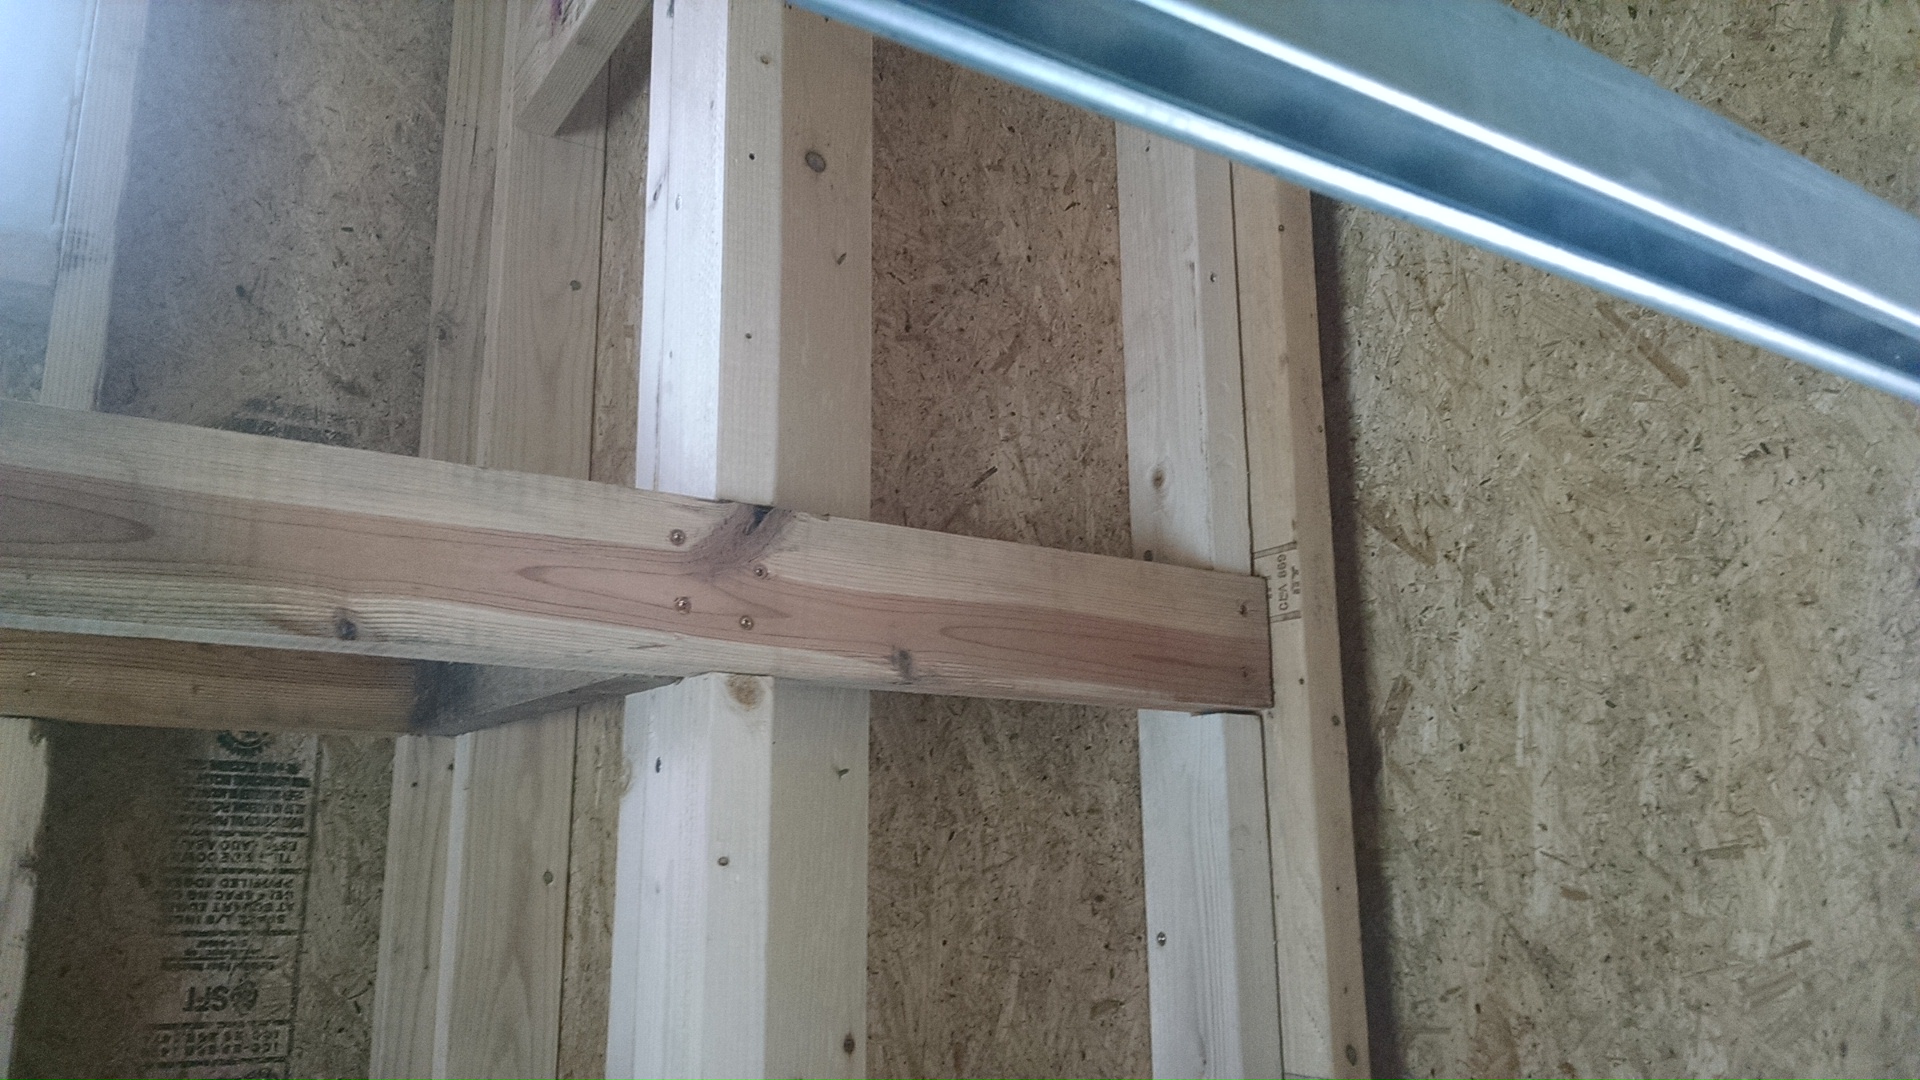 when I framed my tiny house, I inset a ledger at the gable walls to add strength and give support for the future lofts